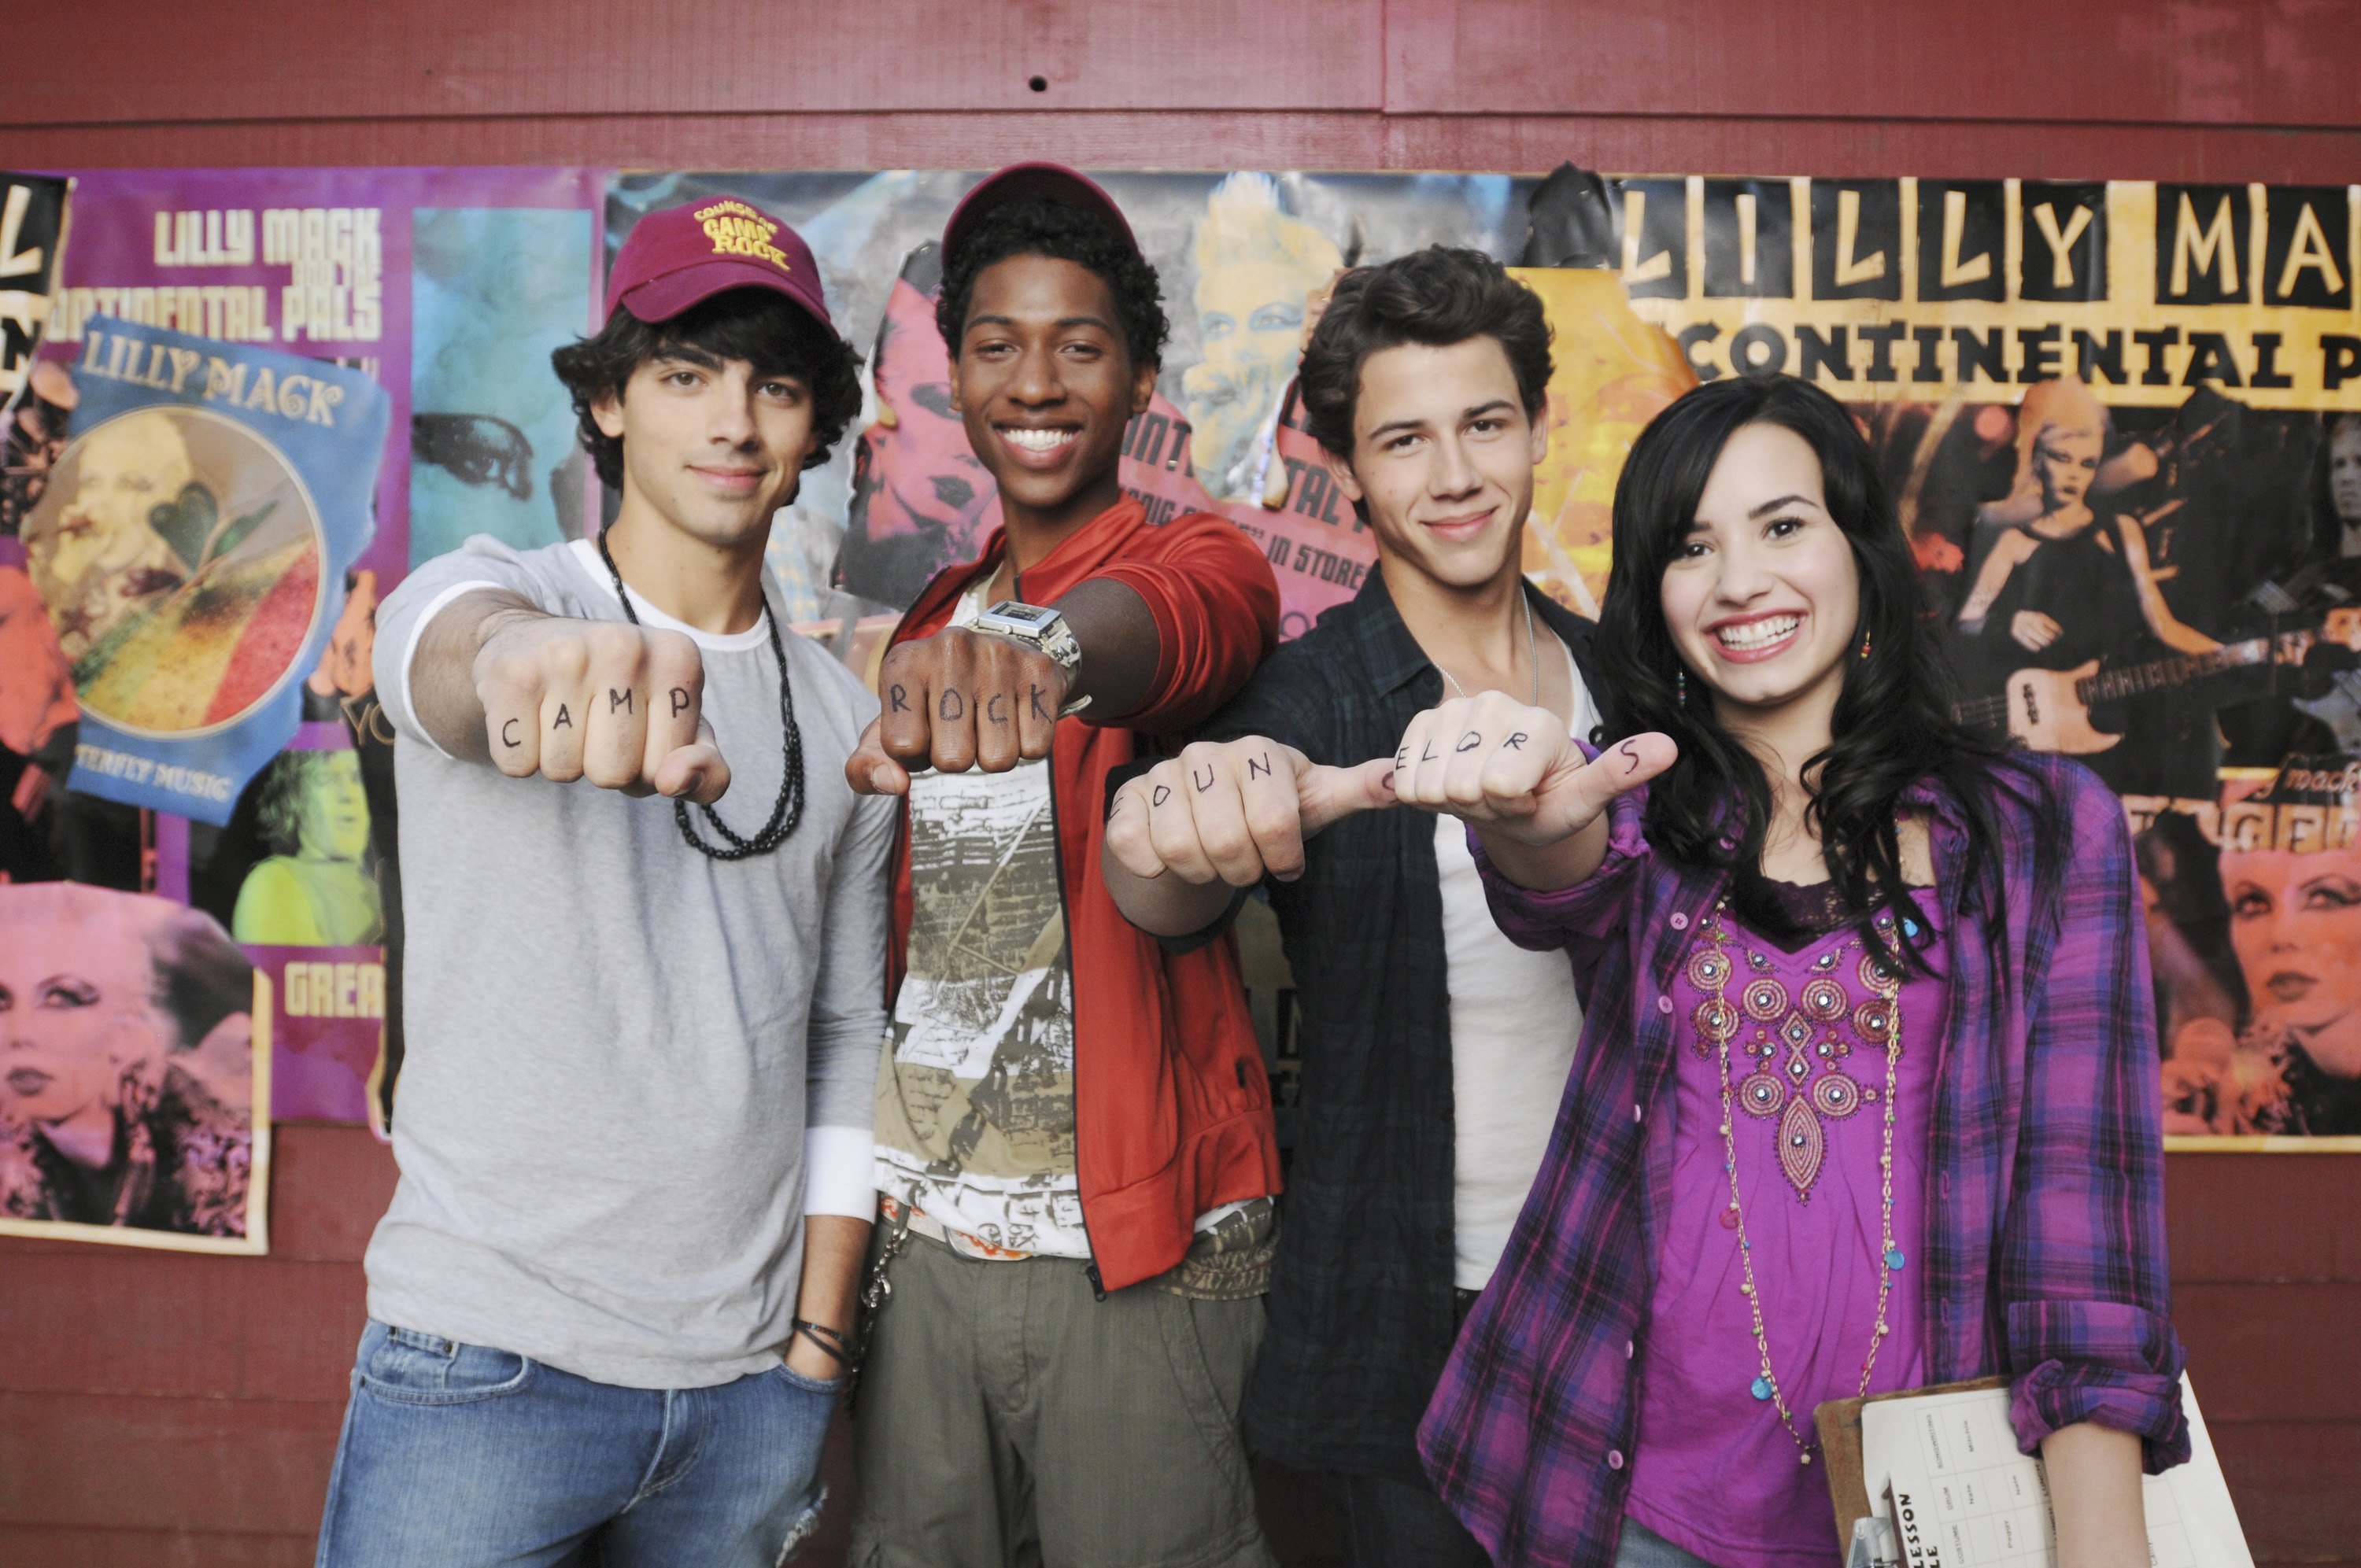 'Camp Rock 2: The Final Jam' starring Demi Lovato and the Jonas Brothers